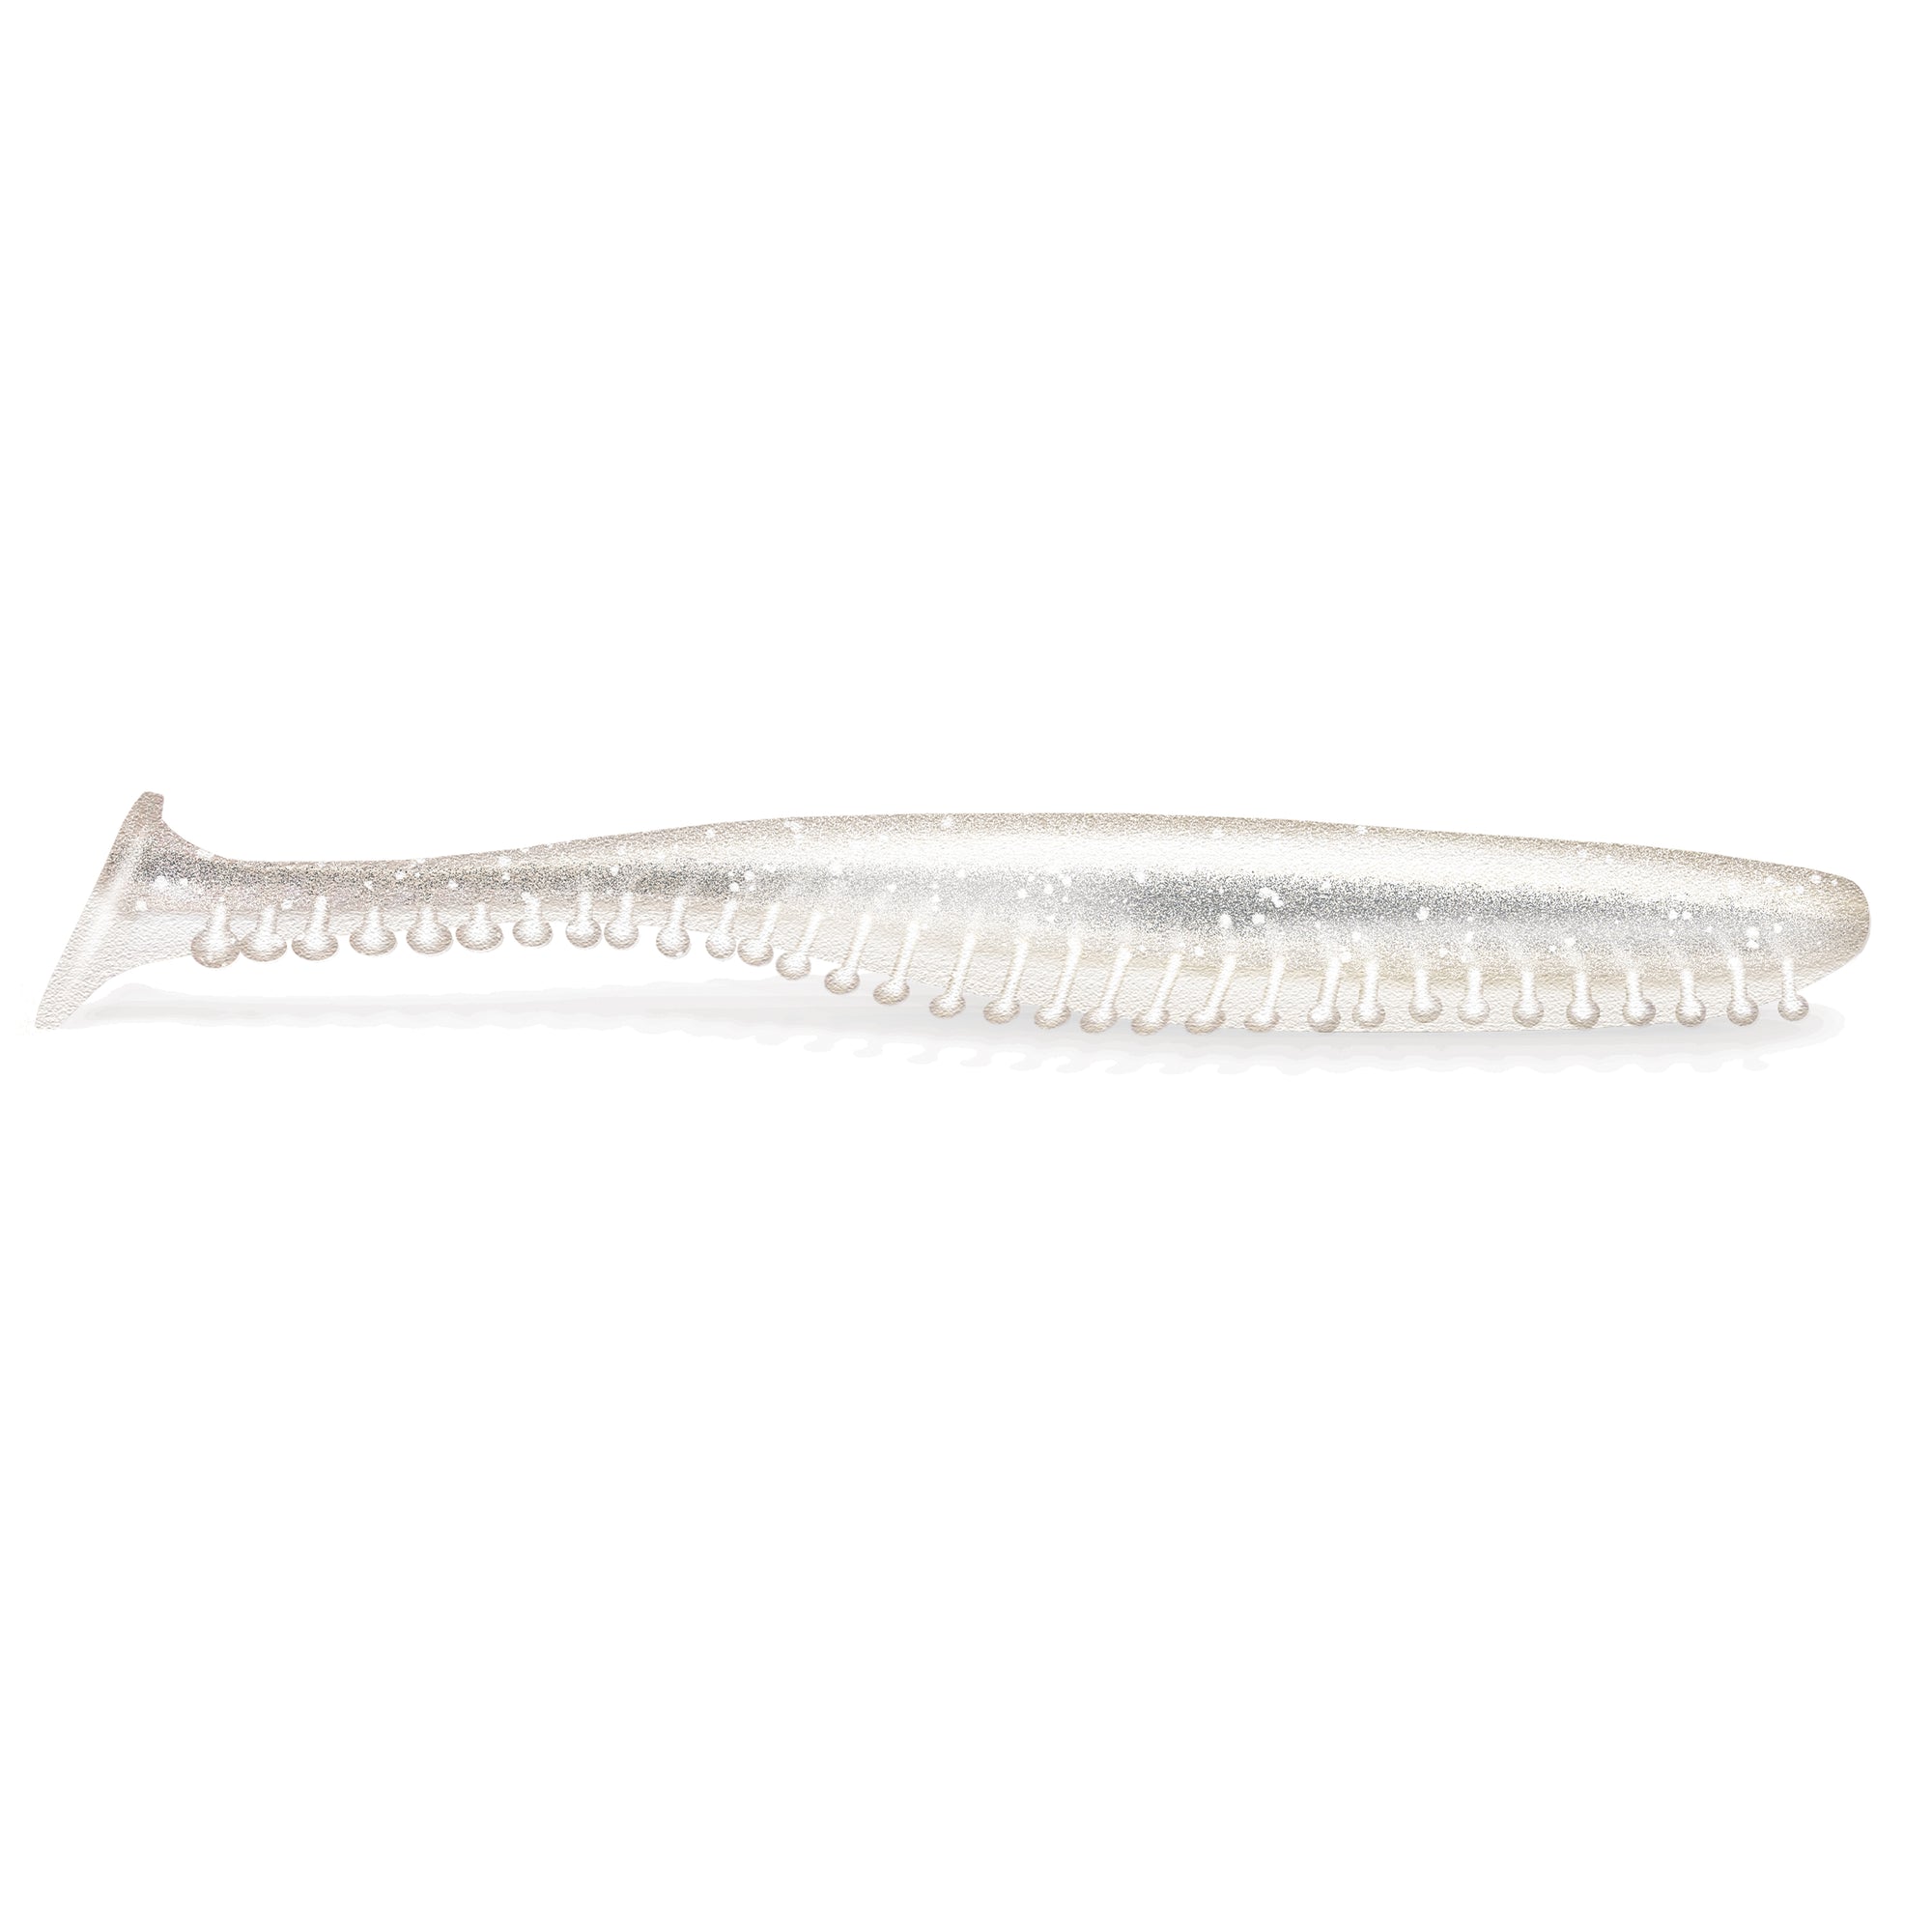 Kalins Silver Ghost 3.8 Tickle Tail – Big Eye Spinnerbaits